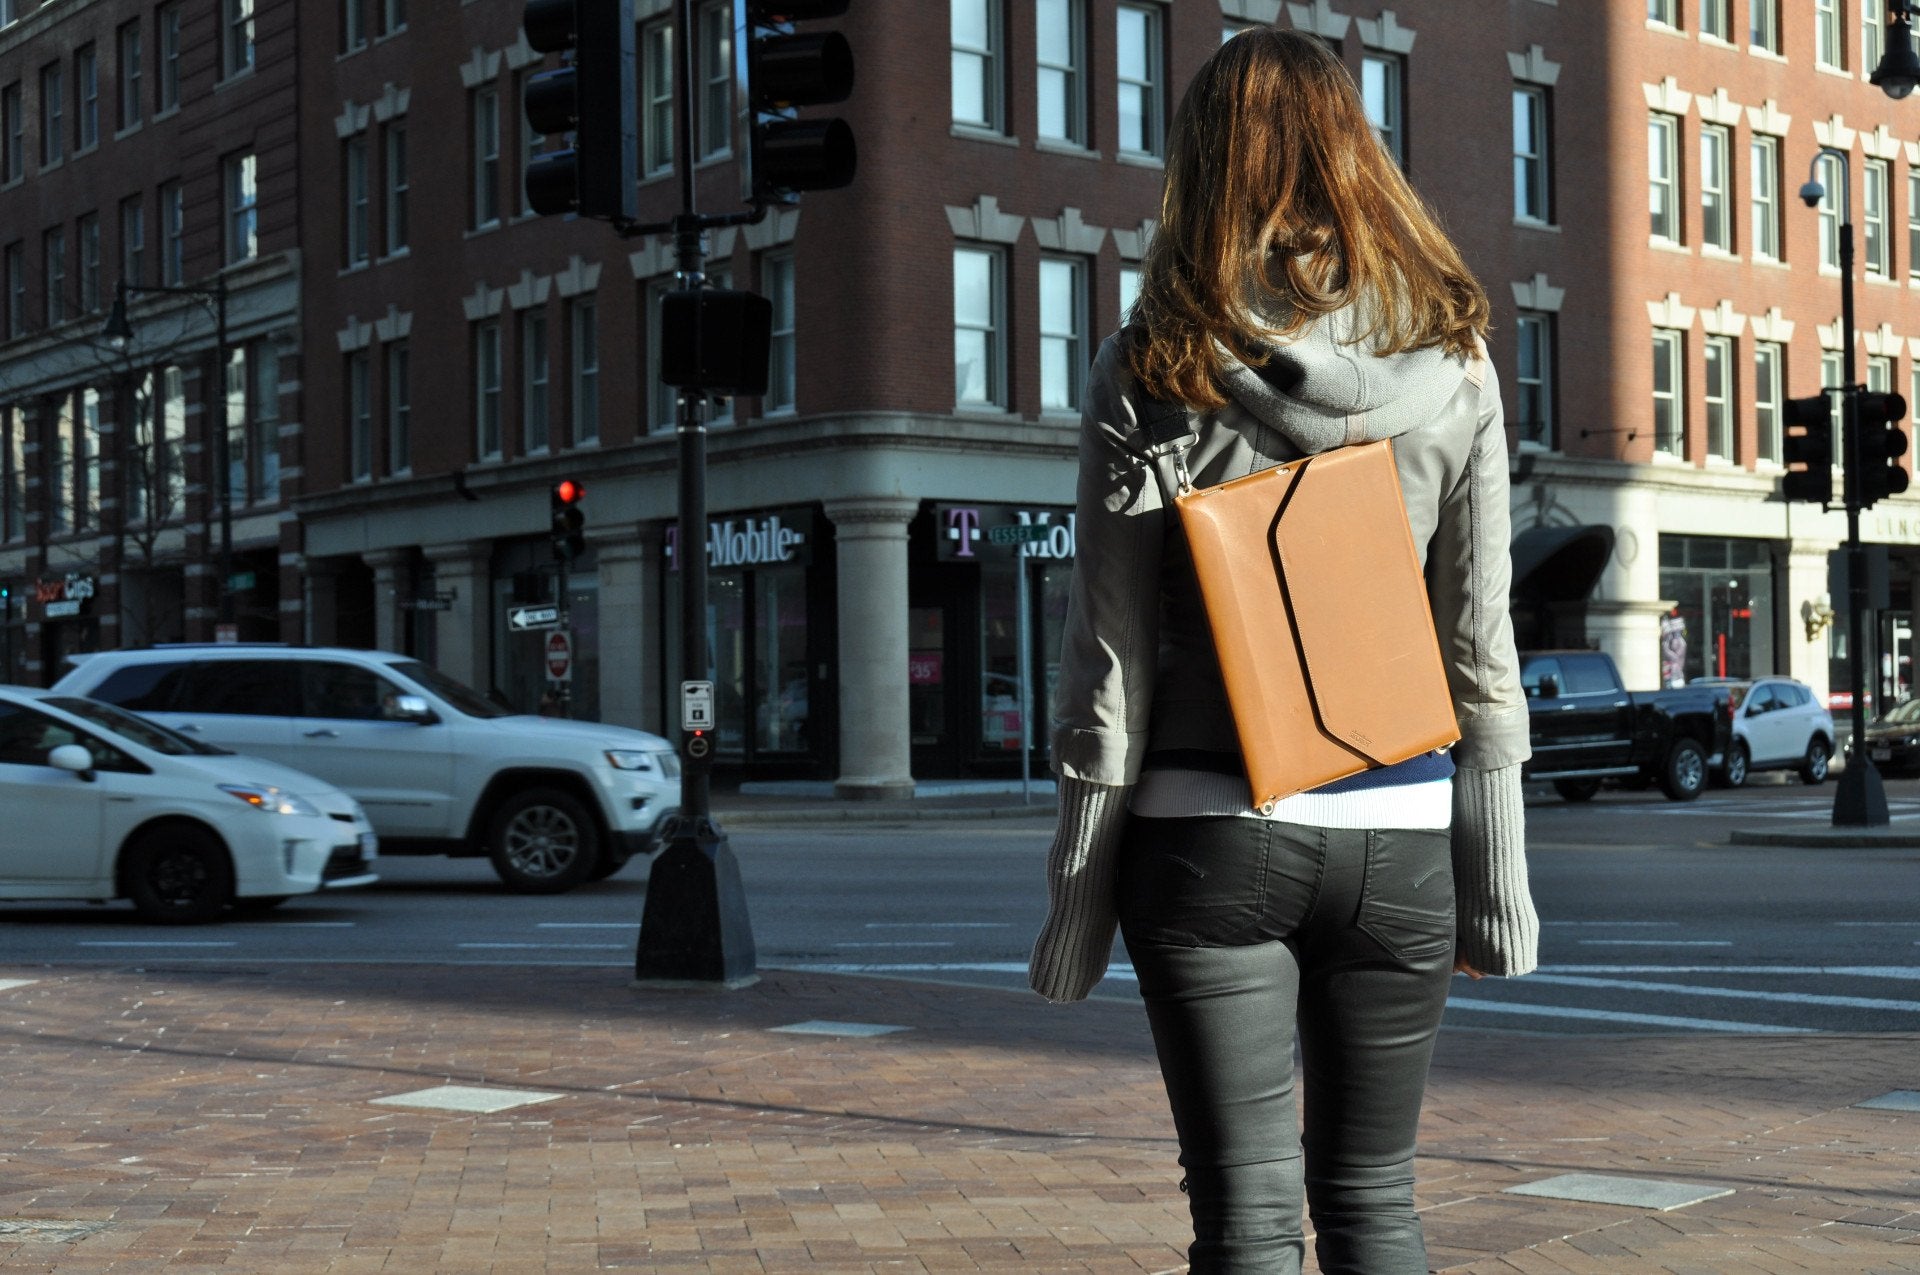 Leather iPad carrying case with shoulder strap, hands-free